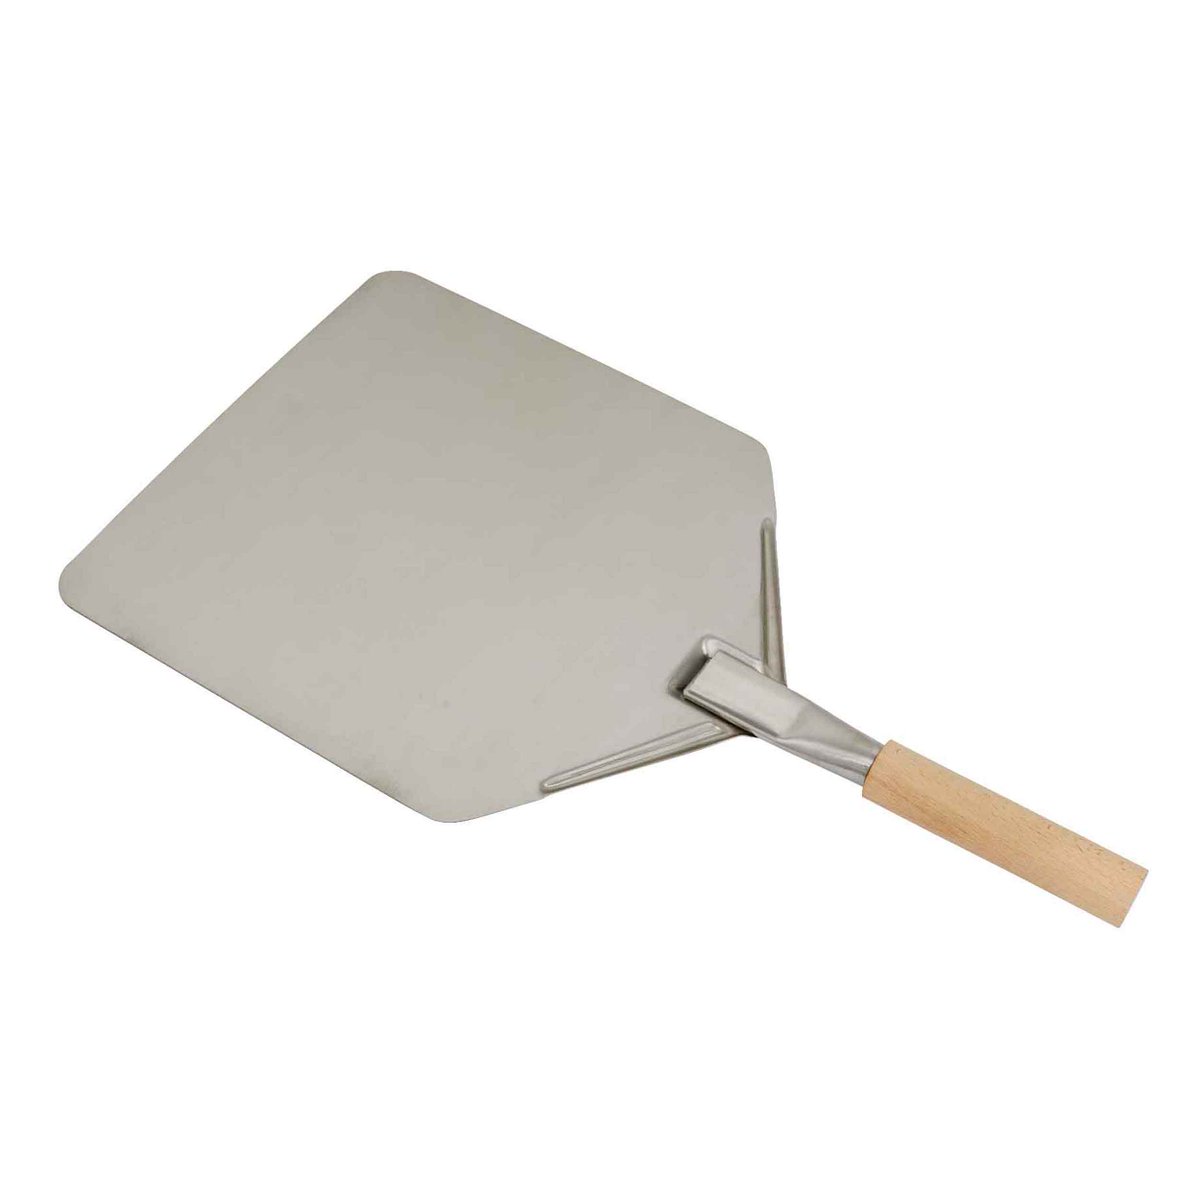 Order your Stainless Steel Pizza Peel, 11 x 15" with 5" Wooden Handle - DG39 - ...